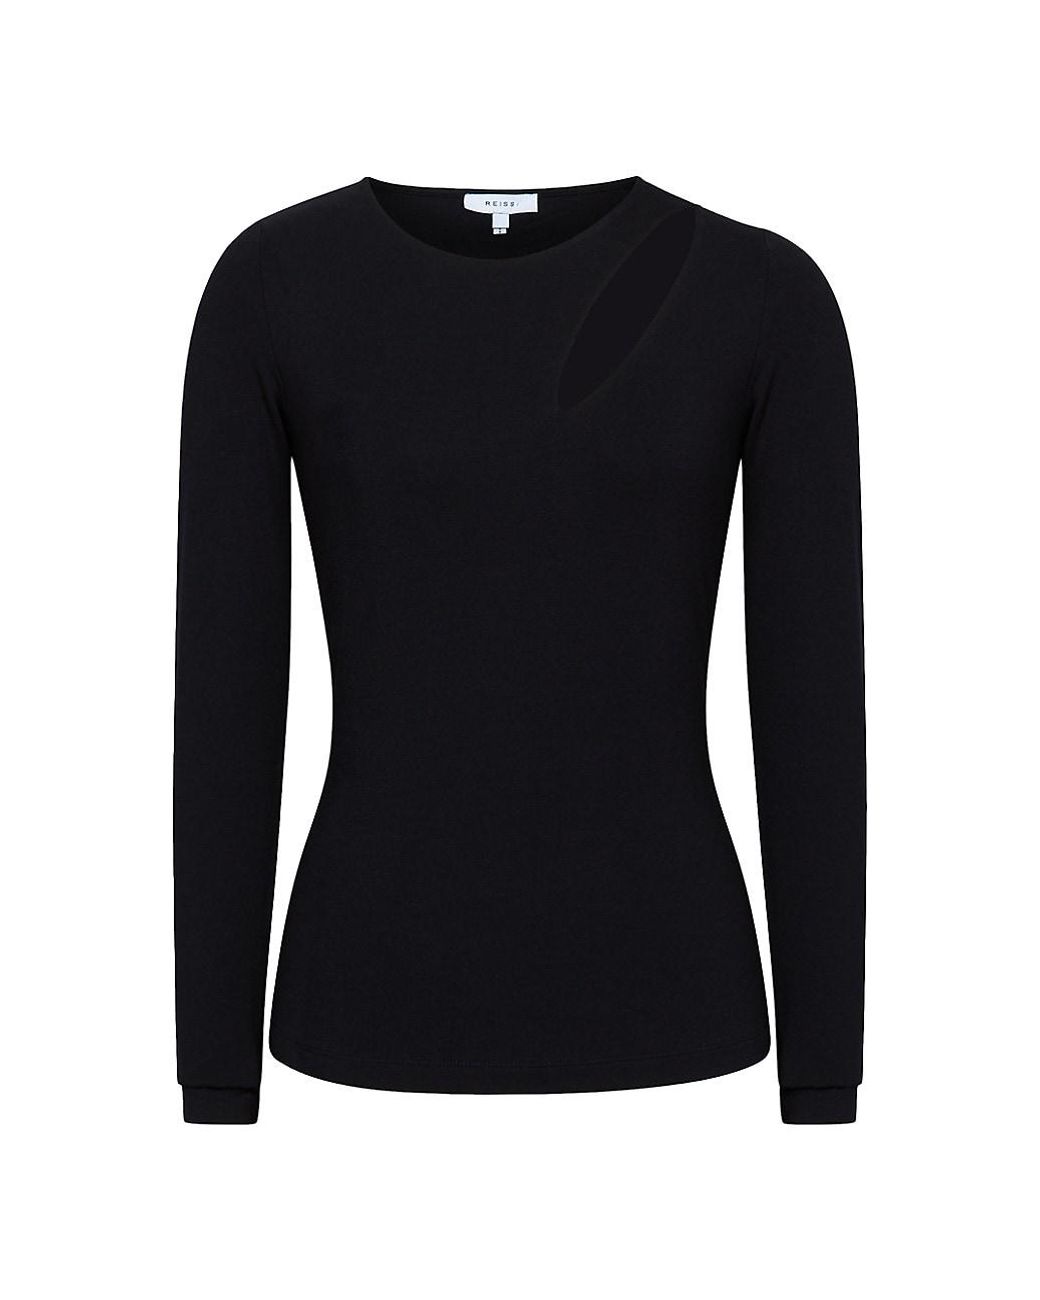 Reiss Synthetic Aubrey Cut-out Jersey Top in Black | Lyst